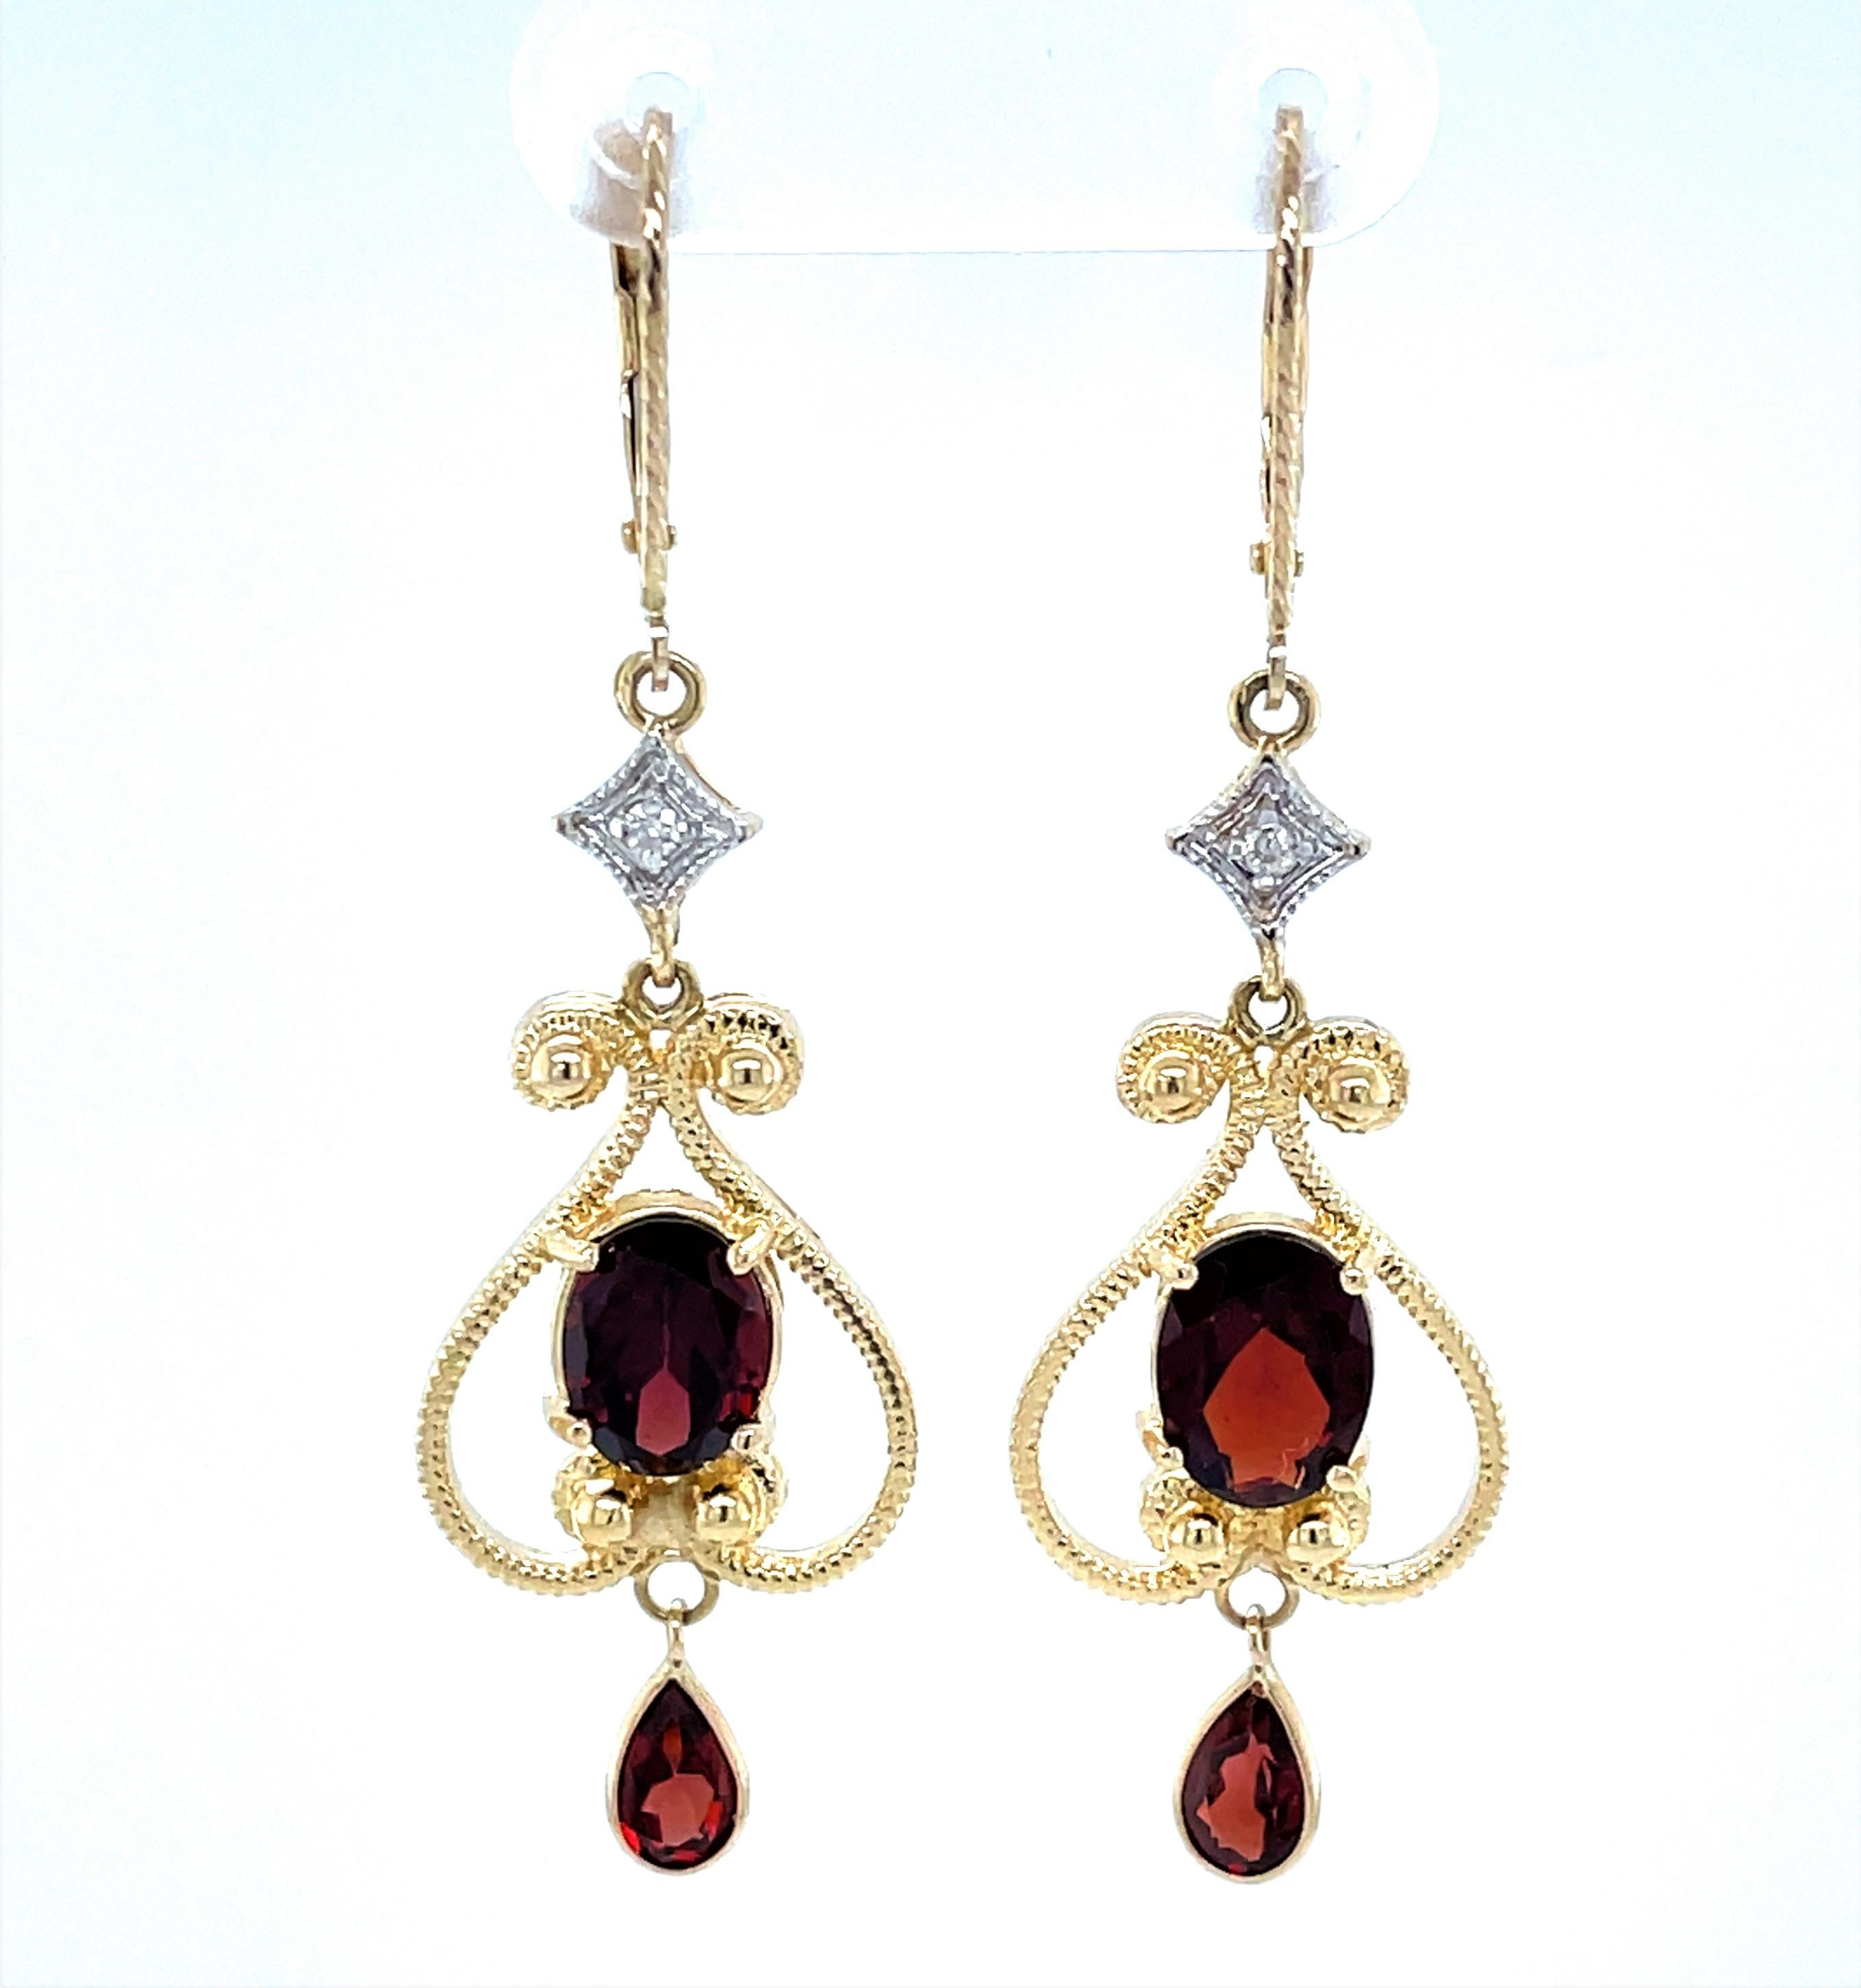 Lovely 14 karat yellow gold earring pair designed in Victorian style with a flowing open scroll motif. Warm 6mm x 8mm oval faceted garnets are the featured stone on each along with a dangle tear drop  3.0 carat TW. Petite round faceted diamond